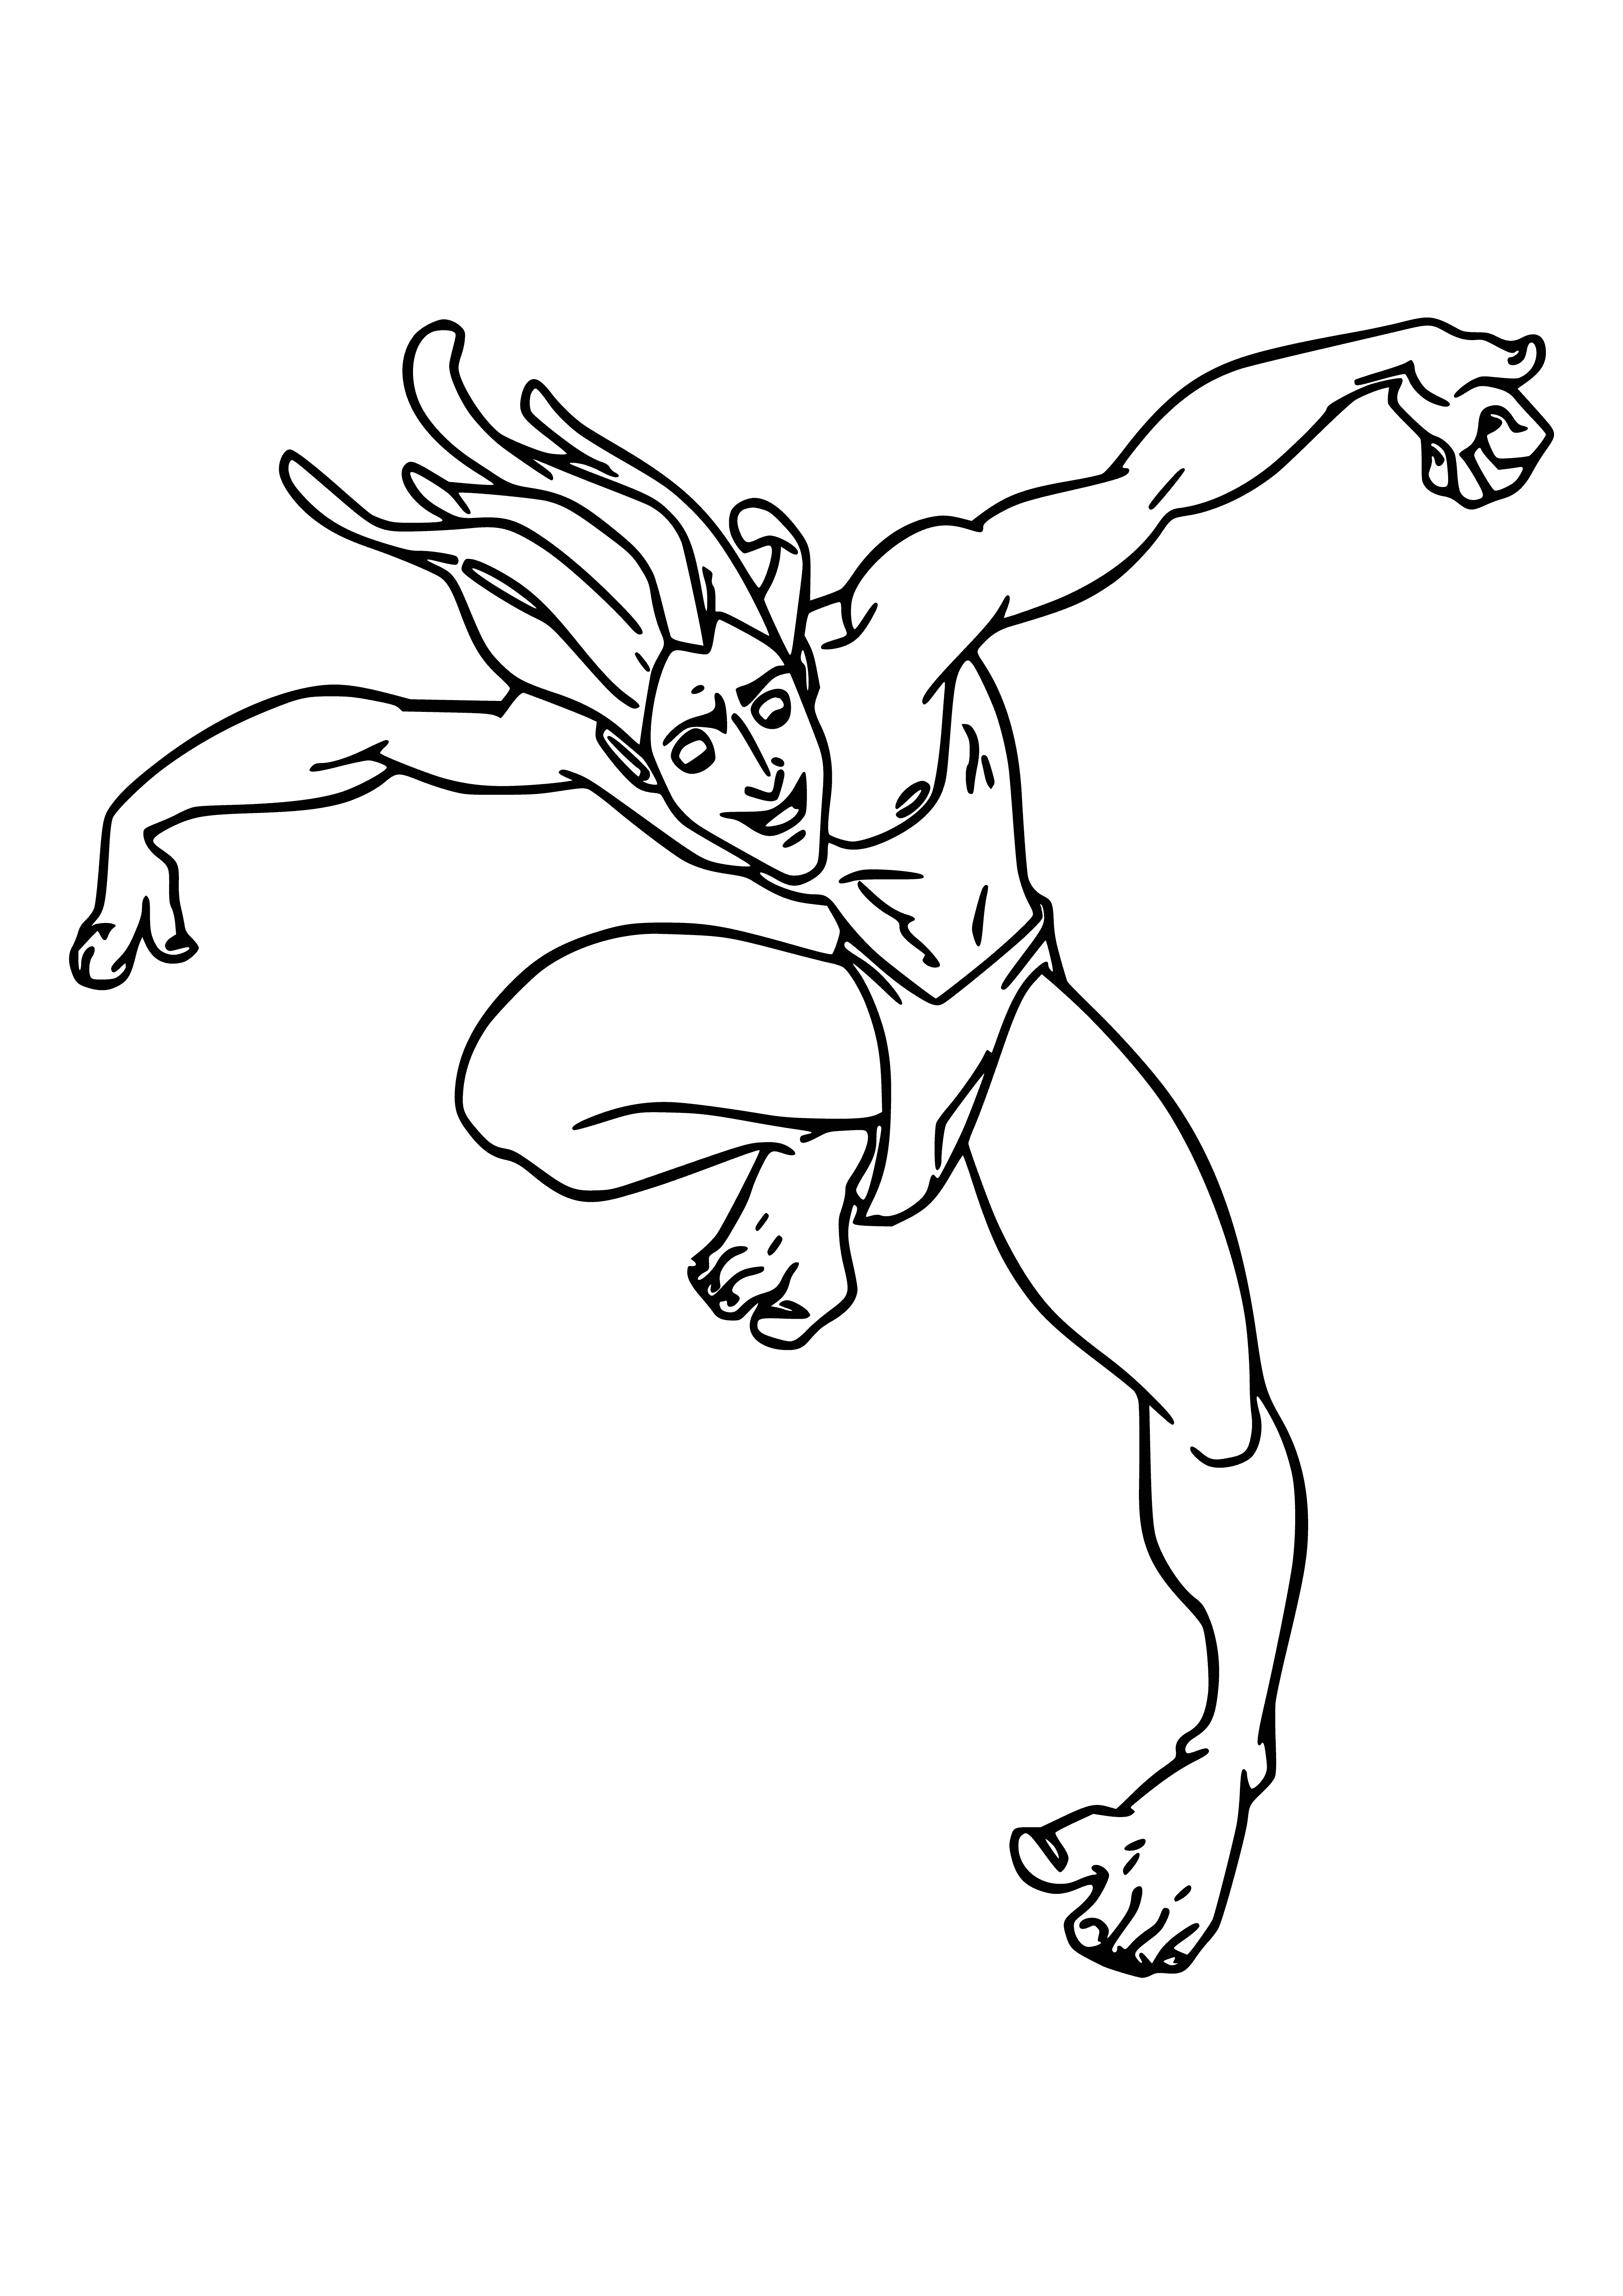 coloring page: A muscular man with long, flowing hair stands on a tree branch, firmly gripping a vine while his gaze is fixed on something in the distance.